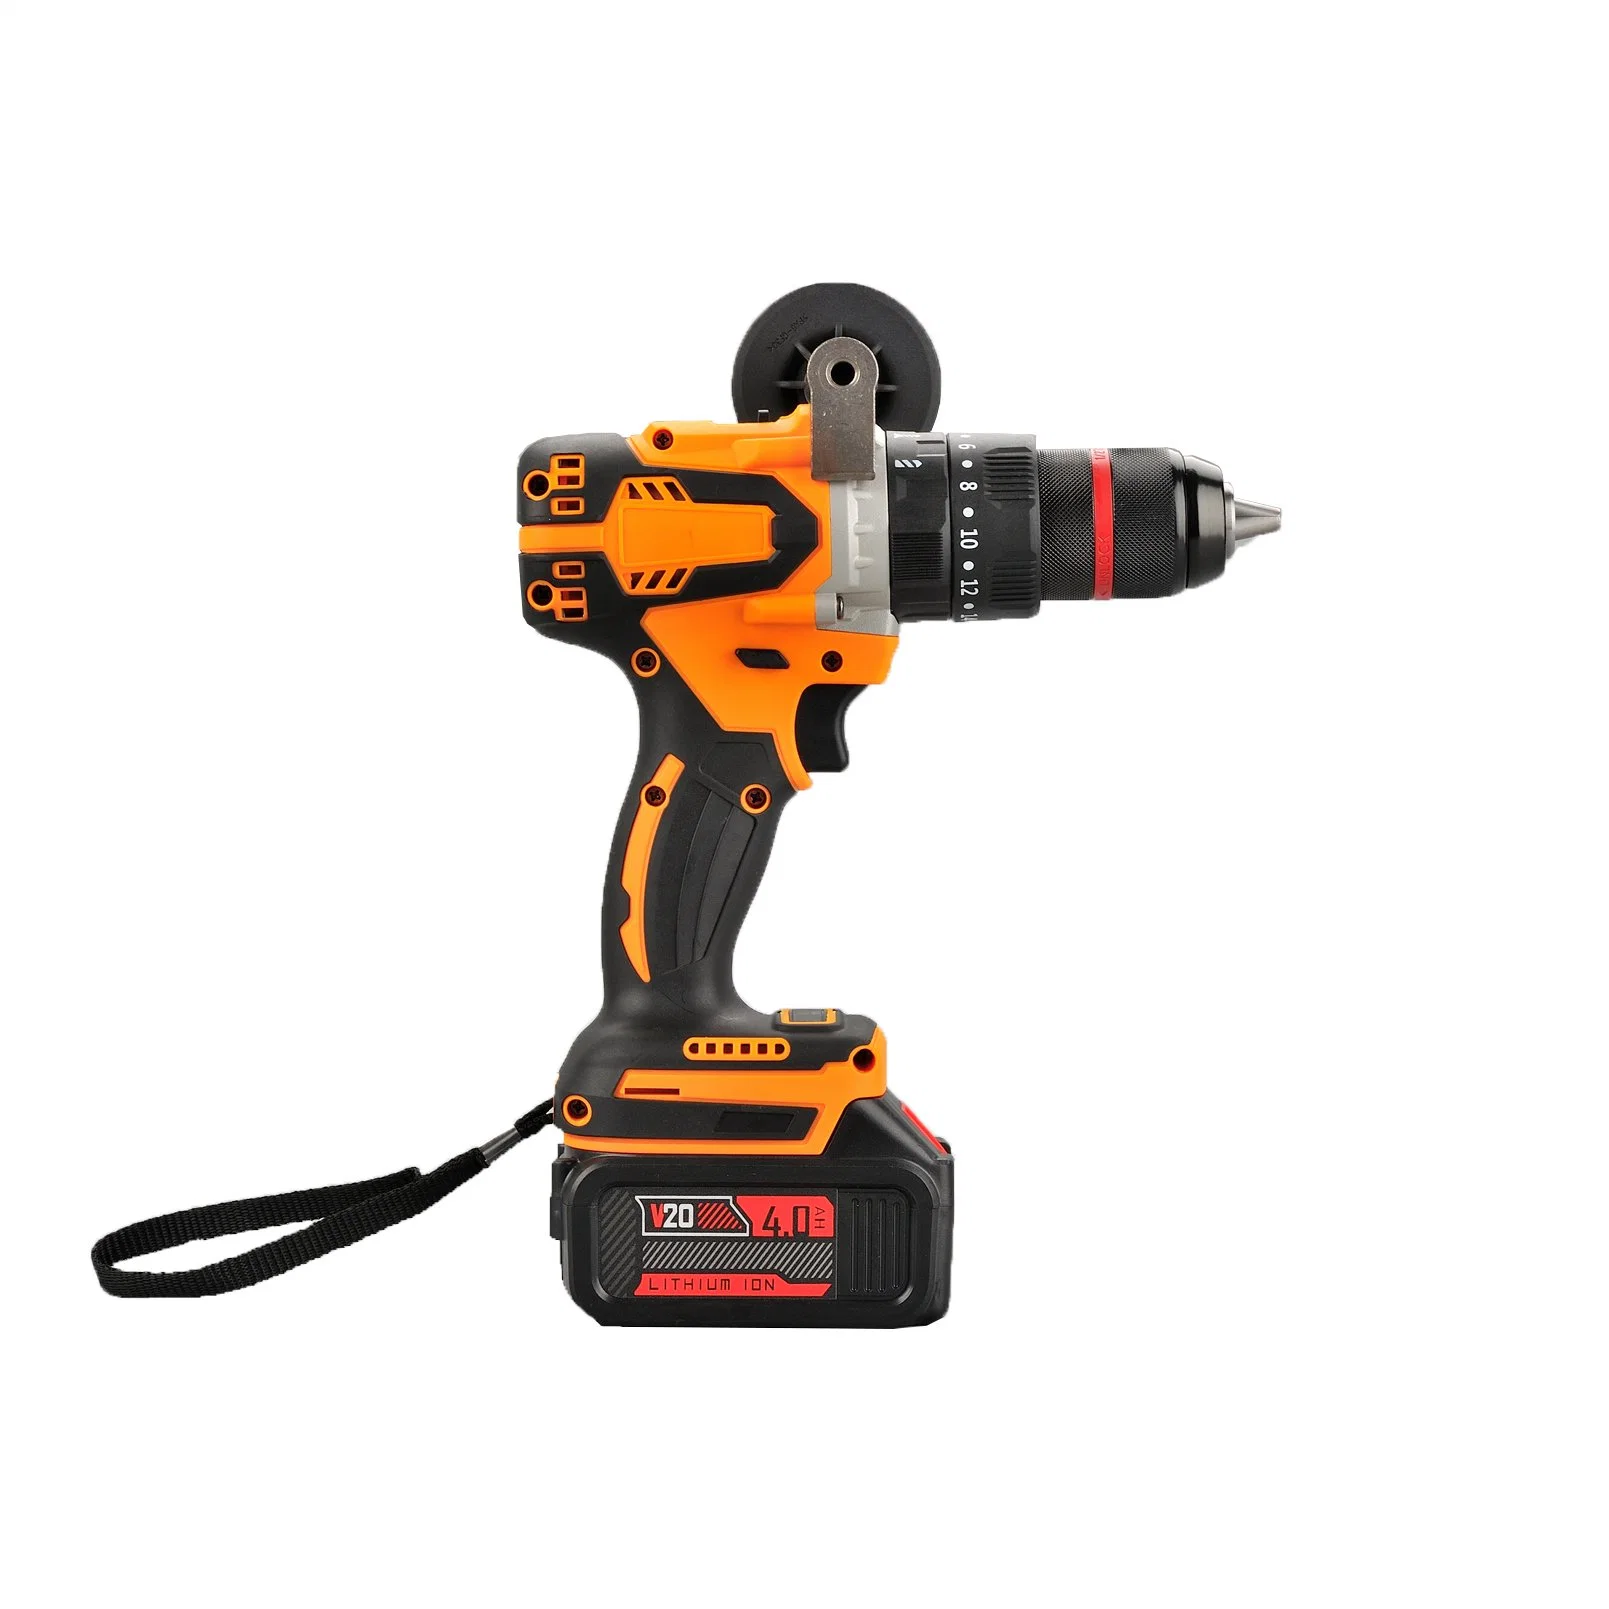 Construction Hardware Tools Portable 21V Battery Electrical Cordless Impact Drill Apt Tools Suppliers